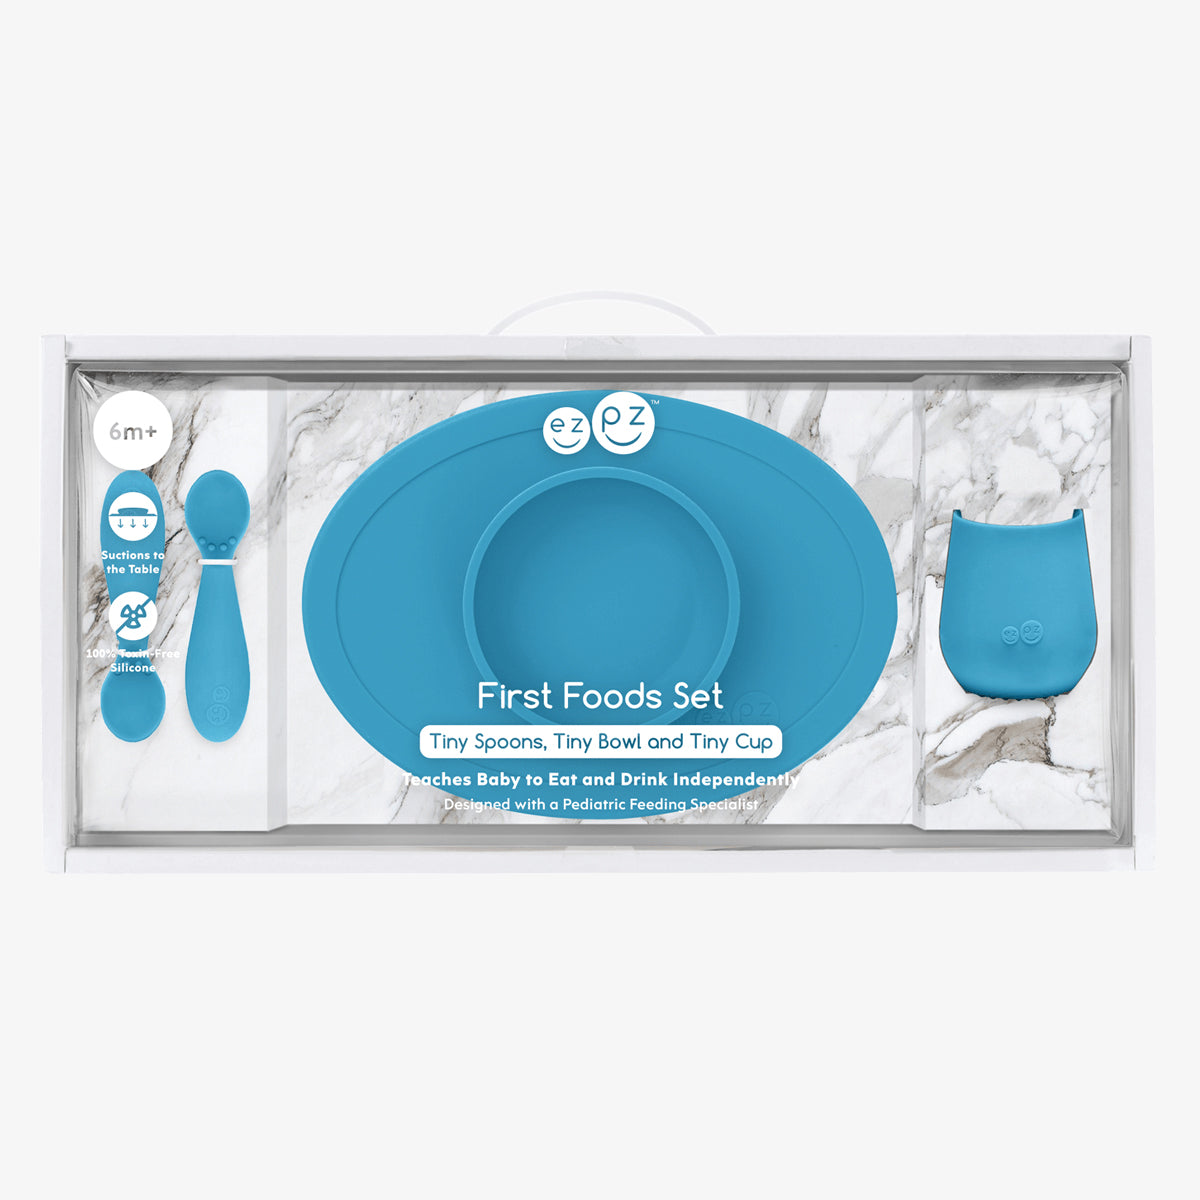 First Foods Set in Blue by ezpz / The Original All-In-One Silicone Plates & Placemats that Stick to the Table